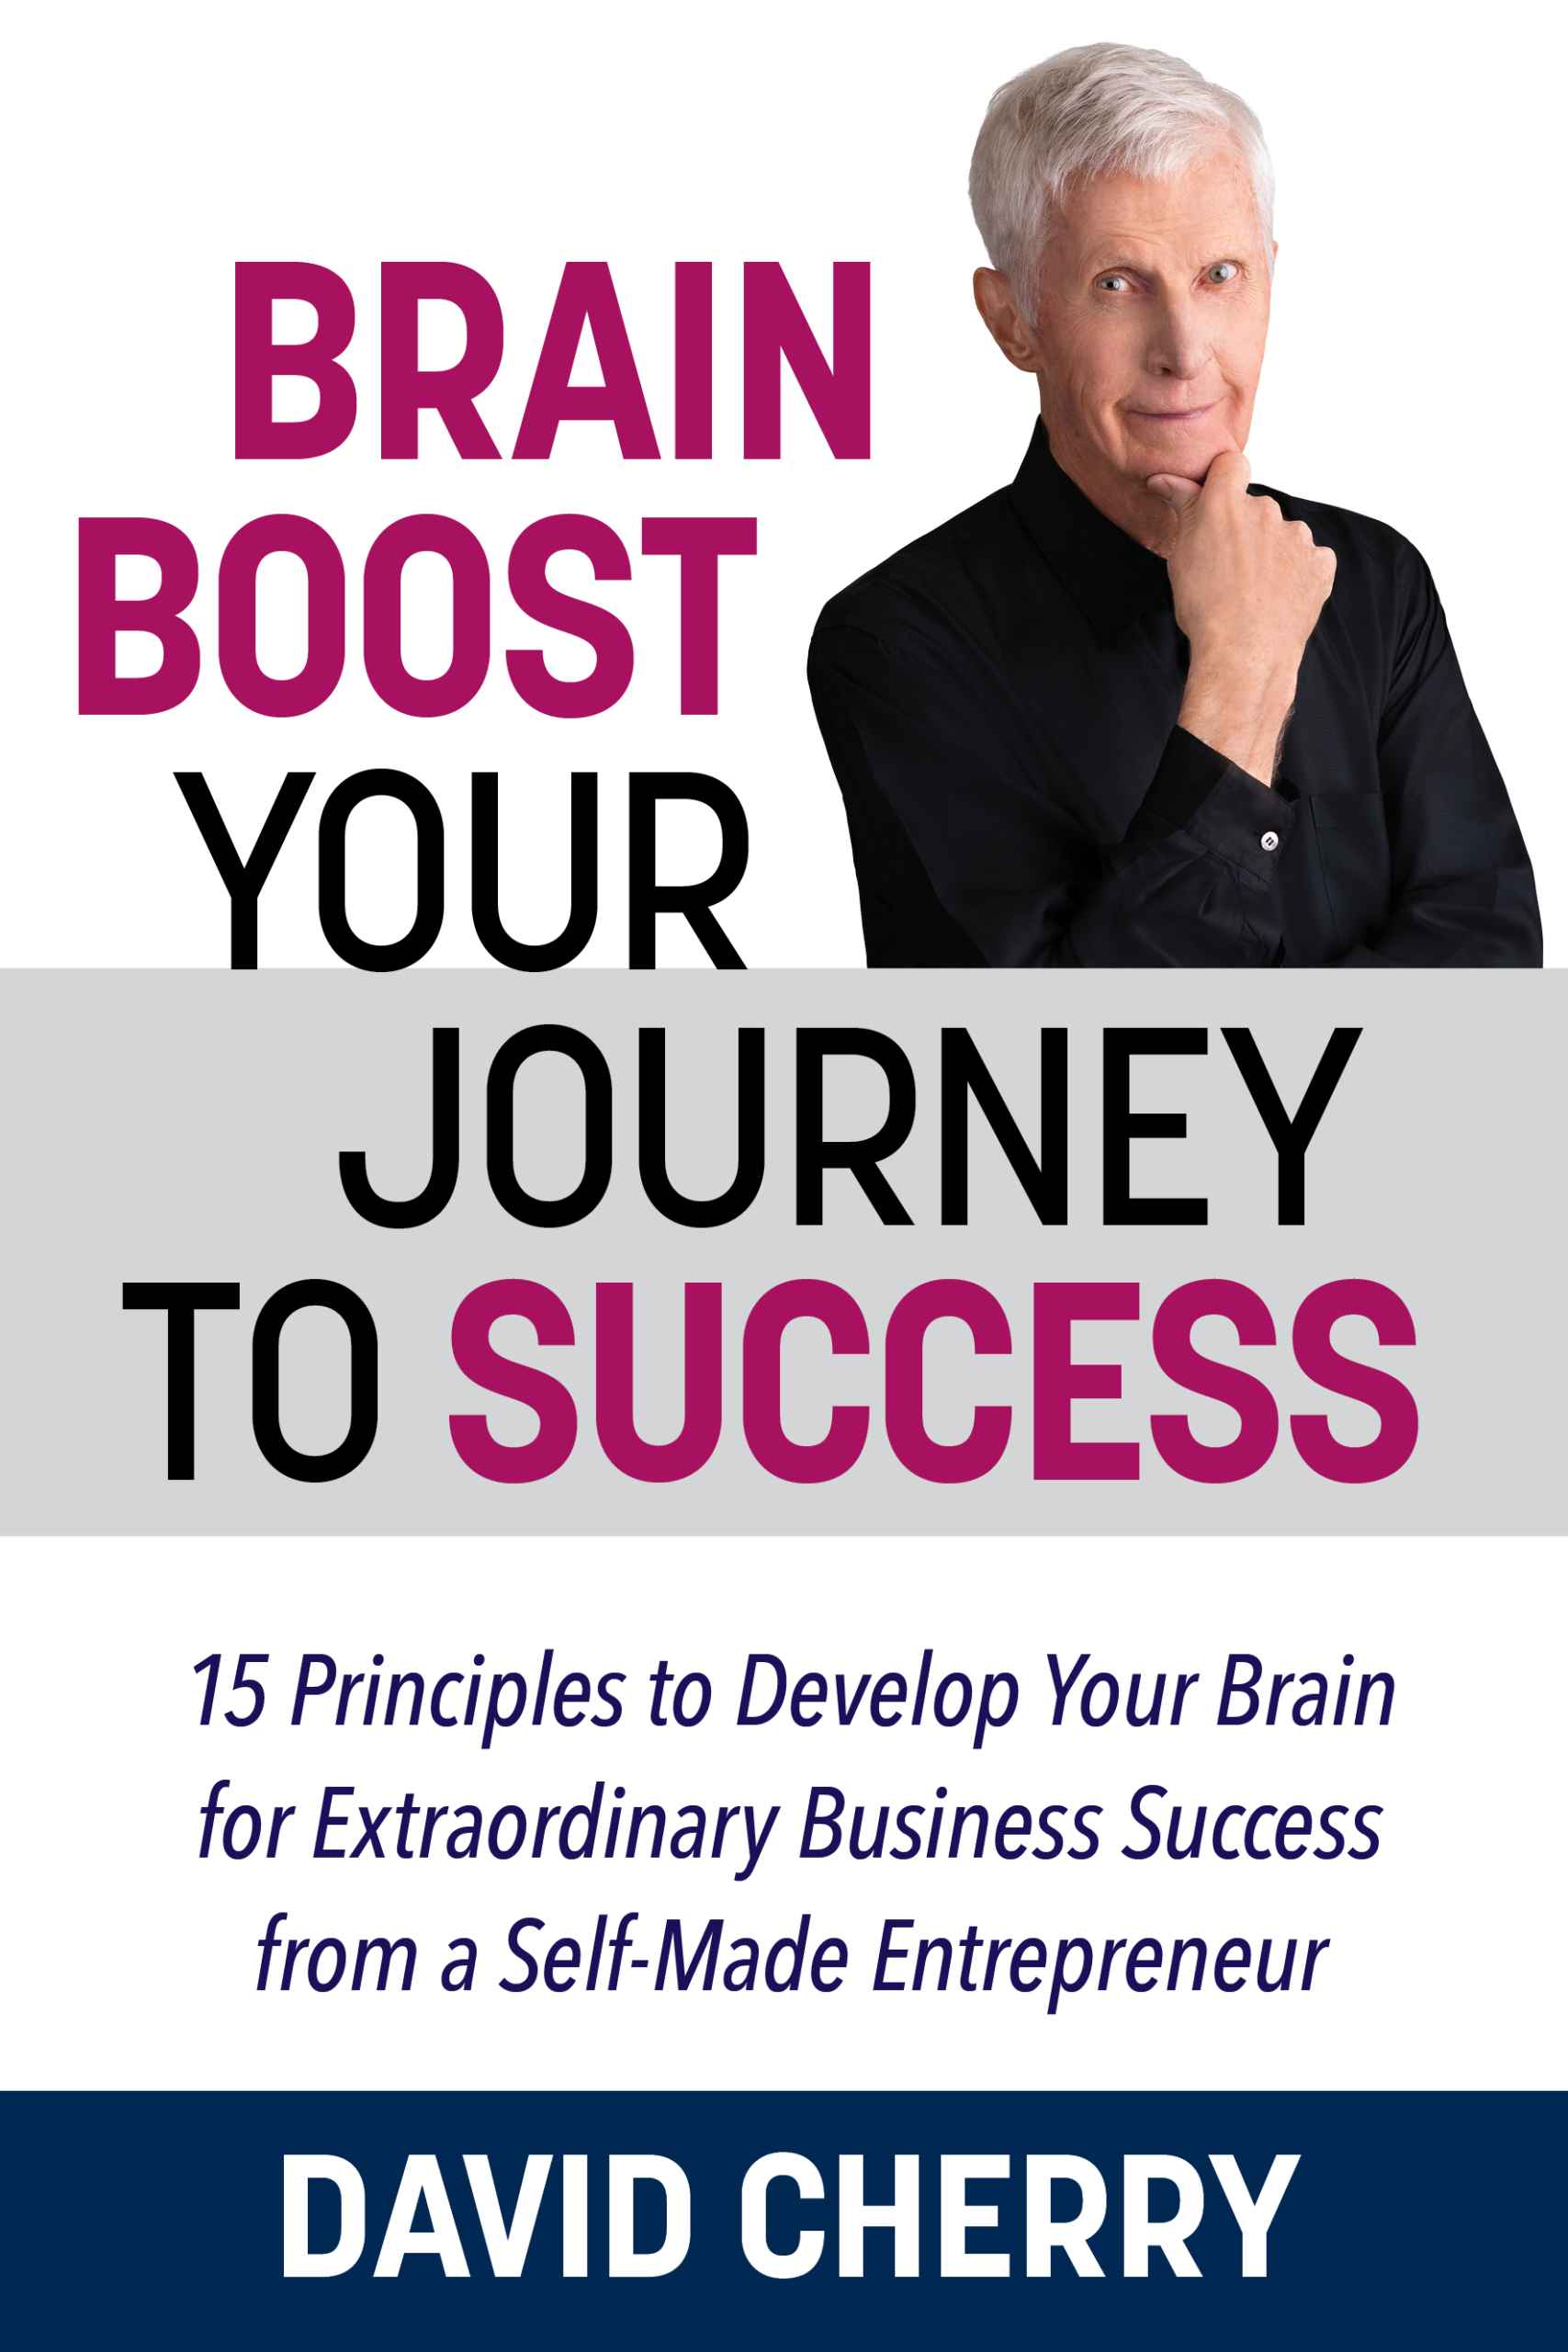 Brain Boost Your Journey to Success